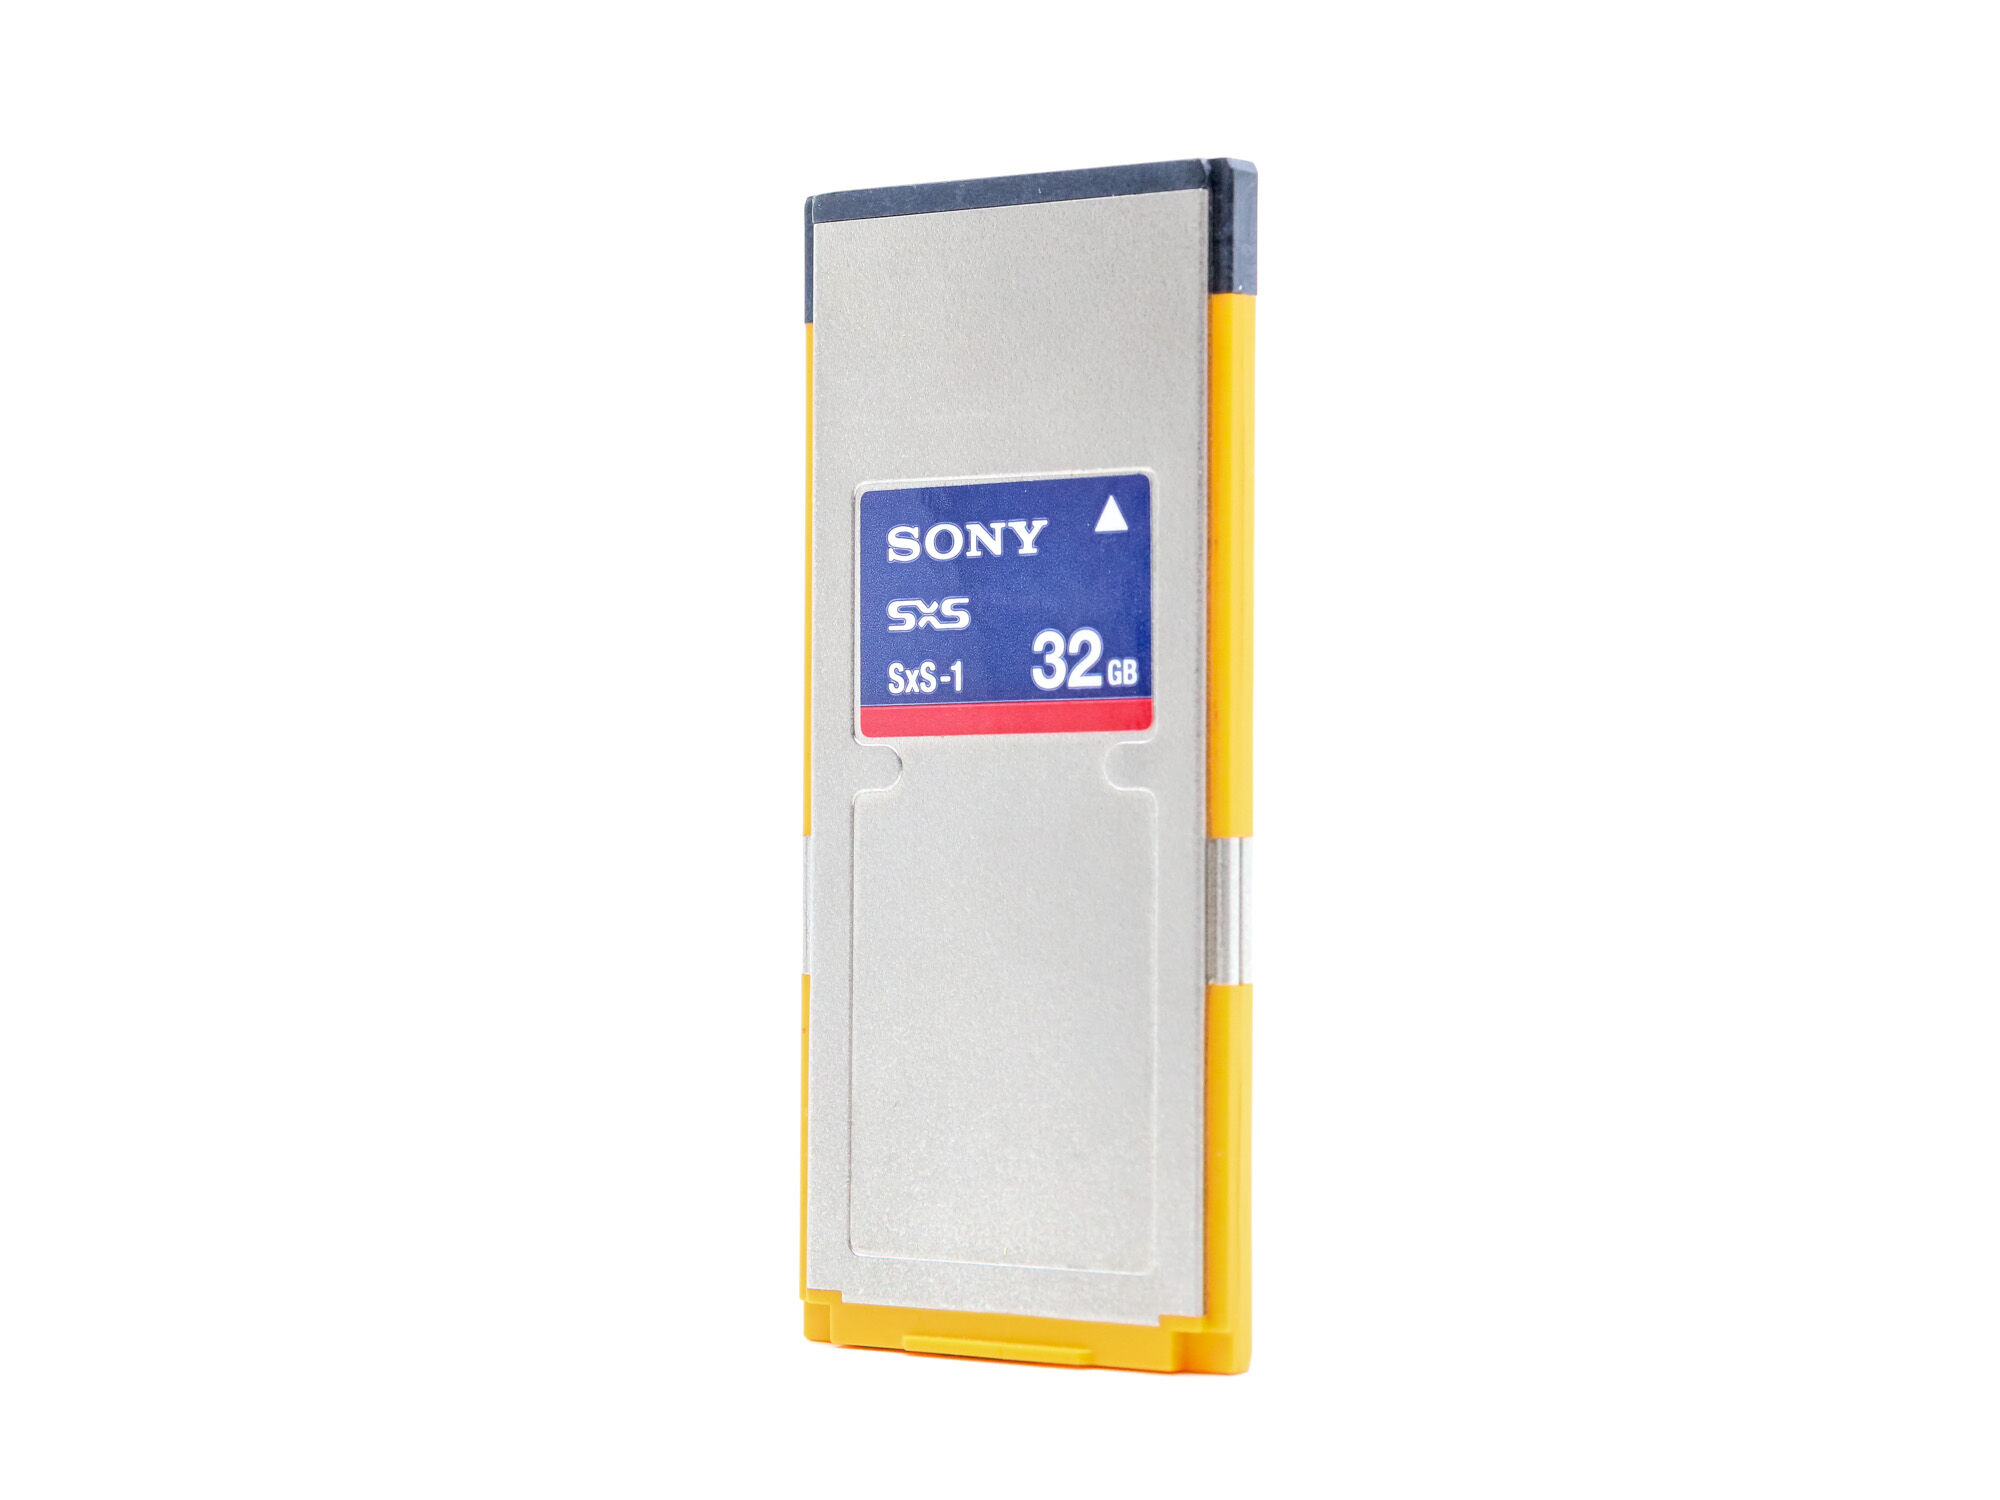 Sony SxS-1 32GB Memory Card (G1A) (Condition: Excellent)